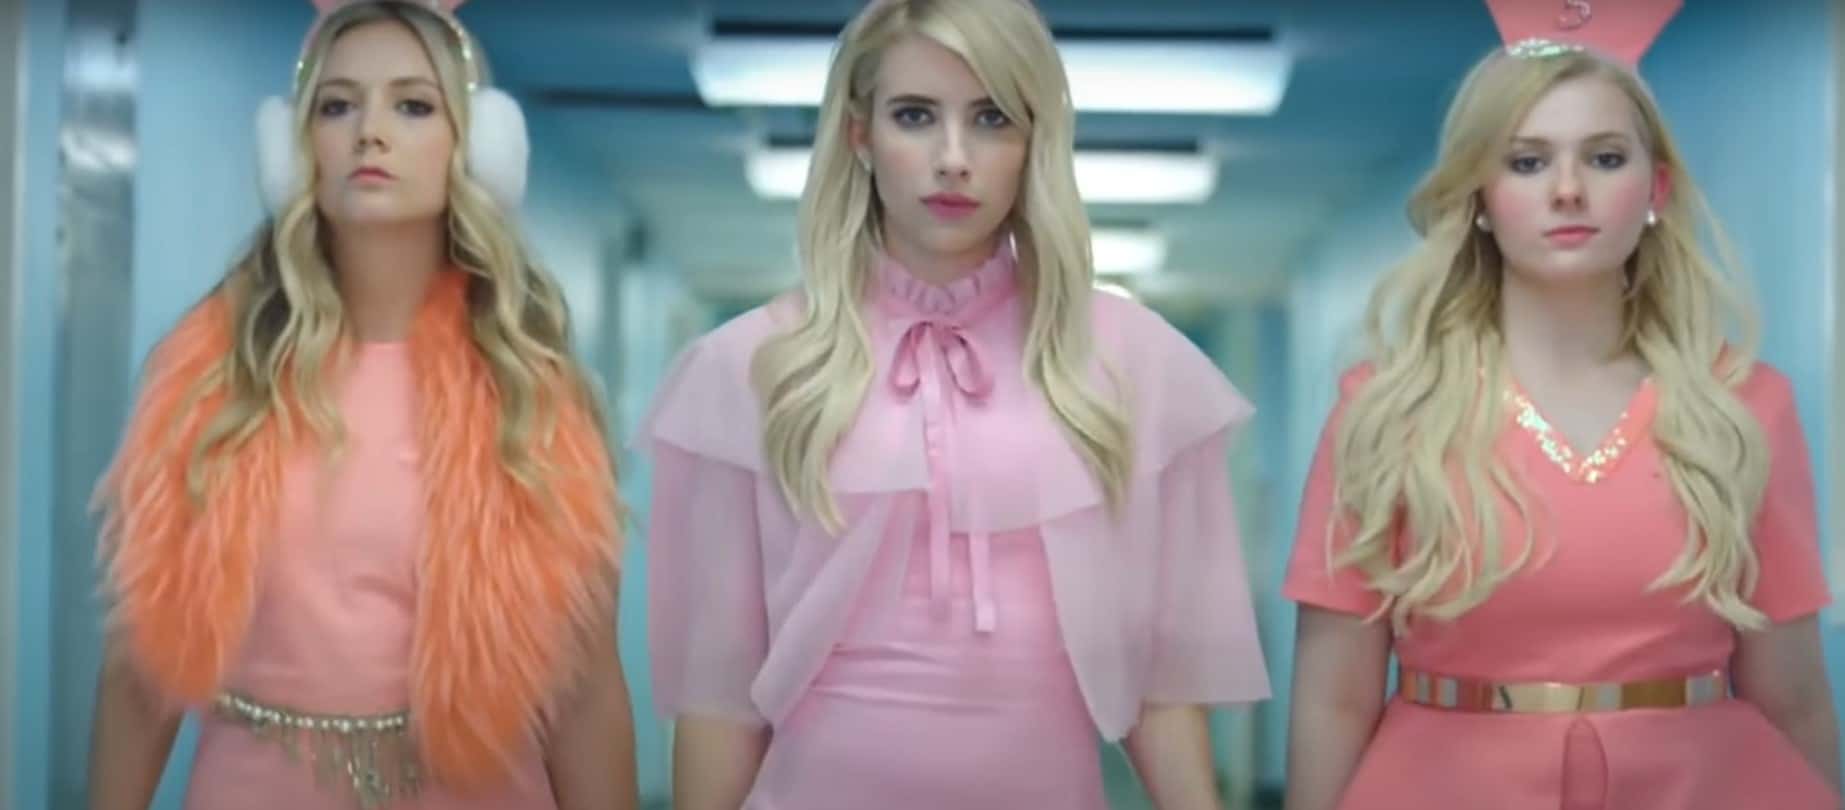 Why Did Scream Queens Get Canceled?